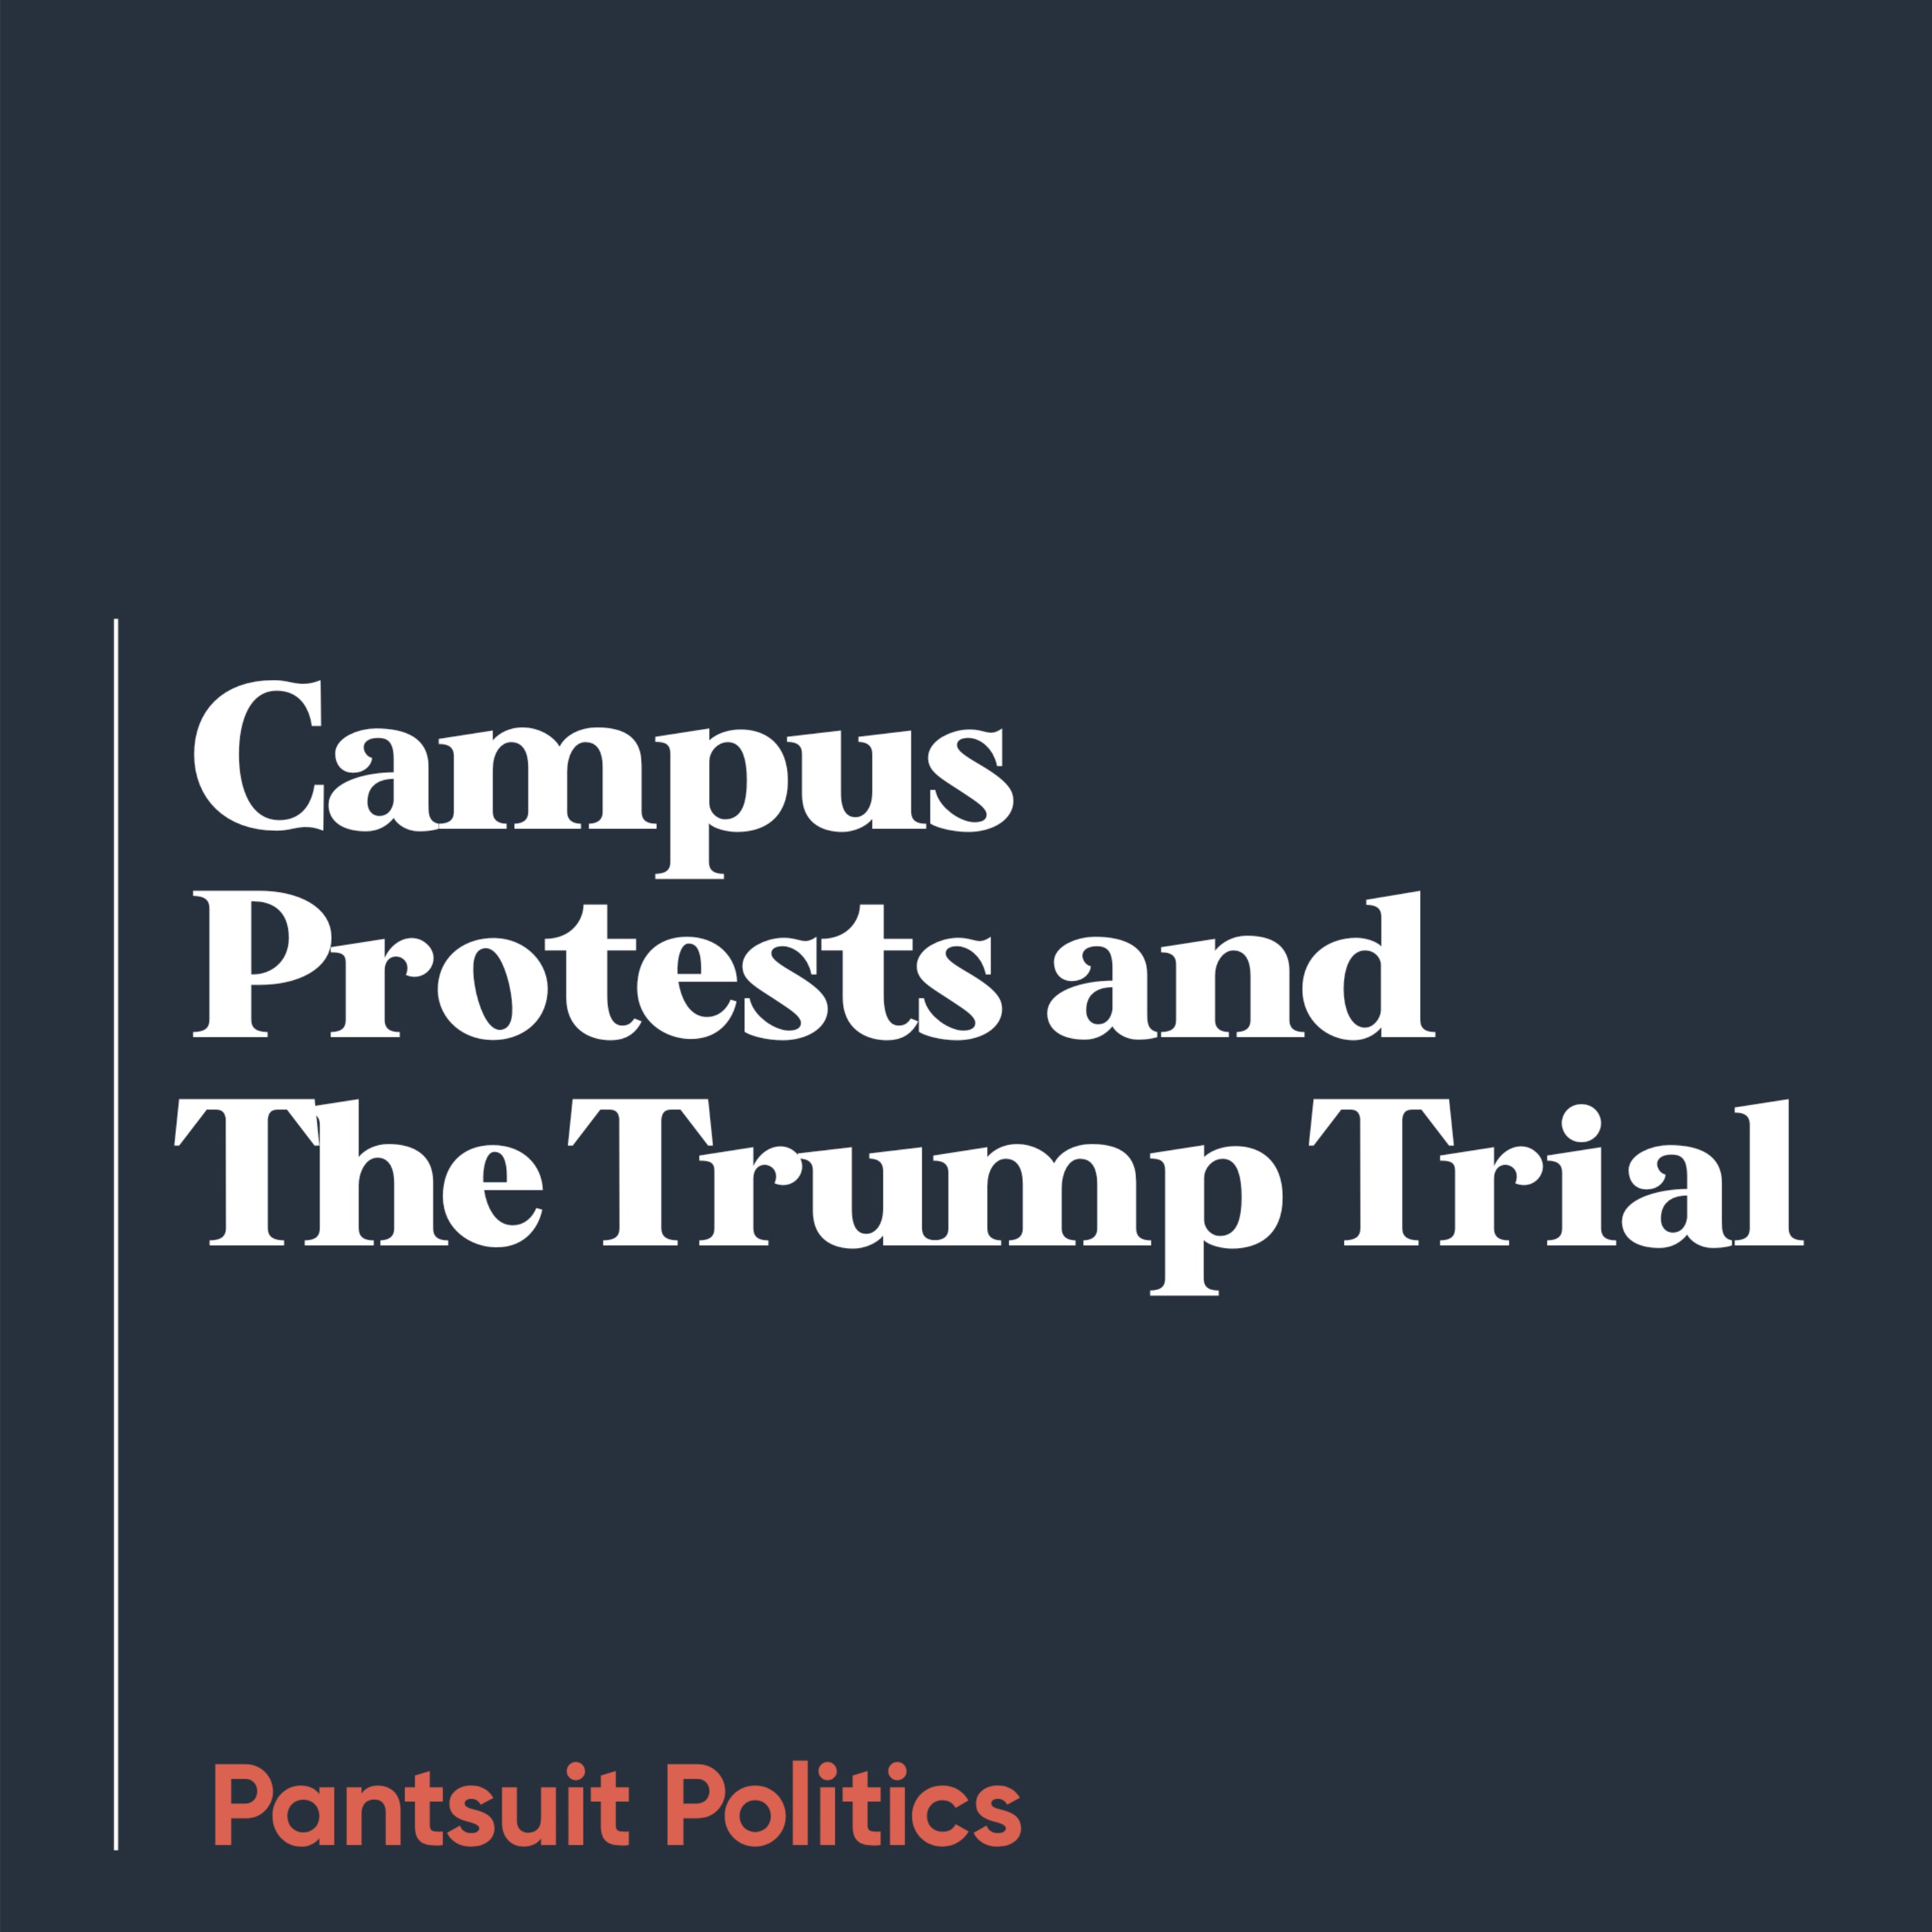 Campus Protests and The Trump Trial